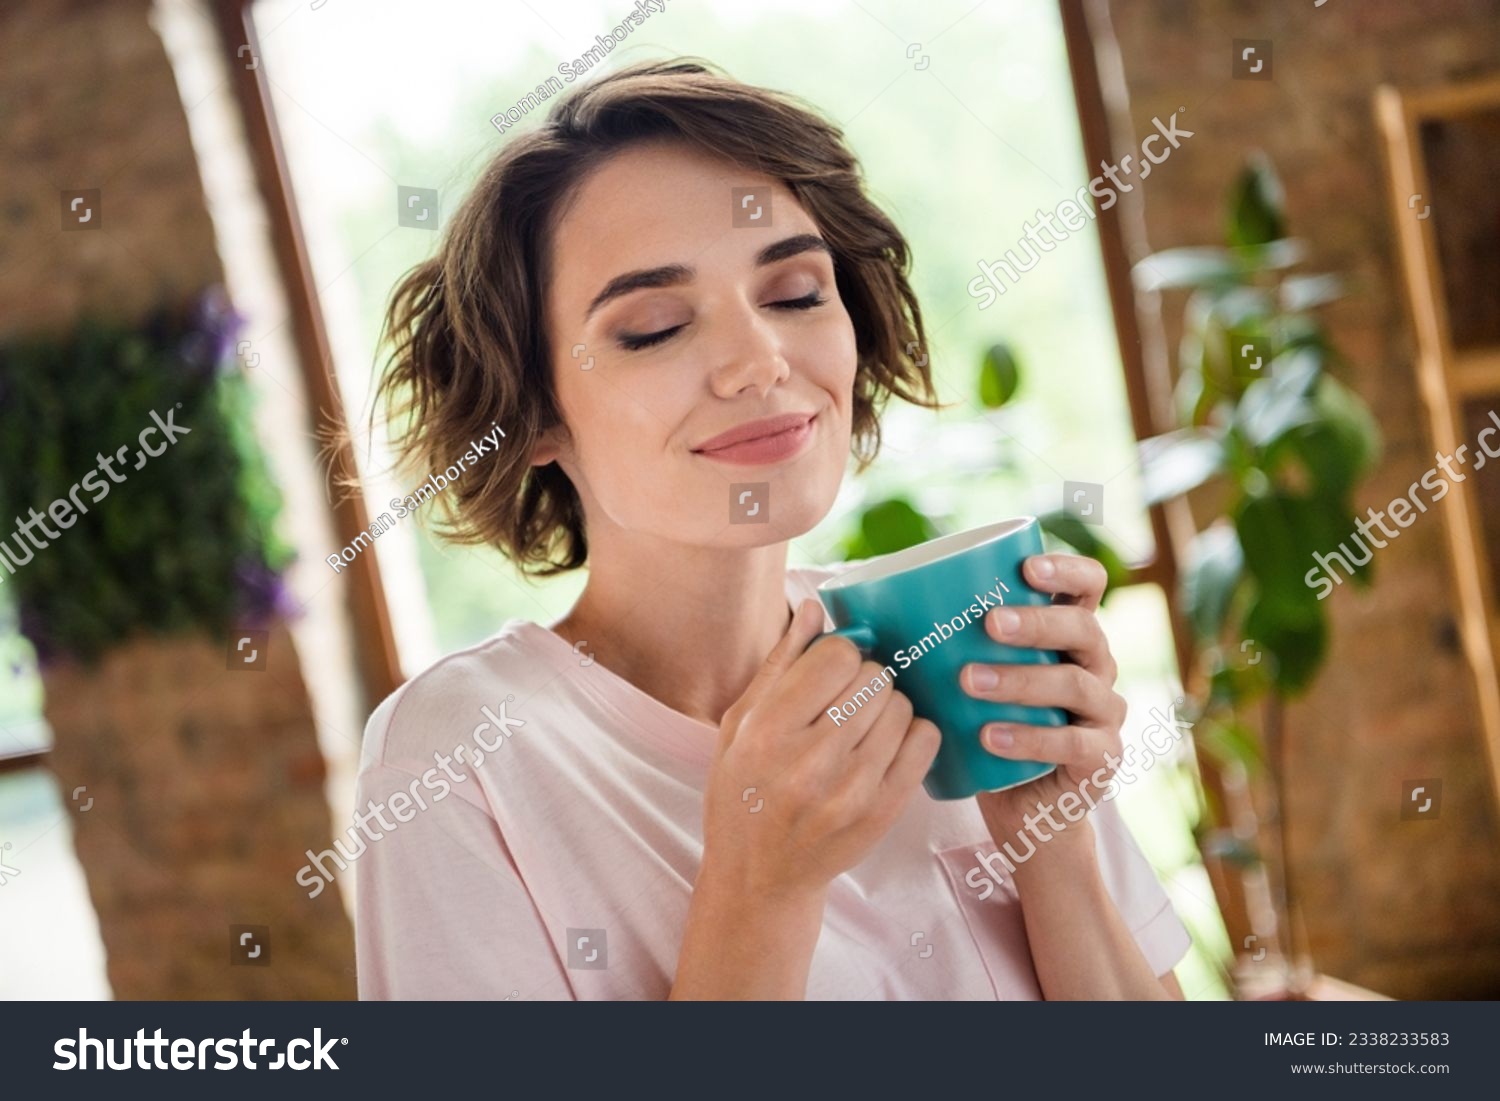 Harmony delight daydream photo relaxed young lady pleased drinking favorite cacao every day good morning in office workplace background #2338233583